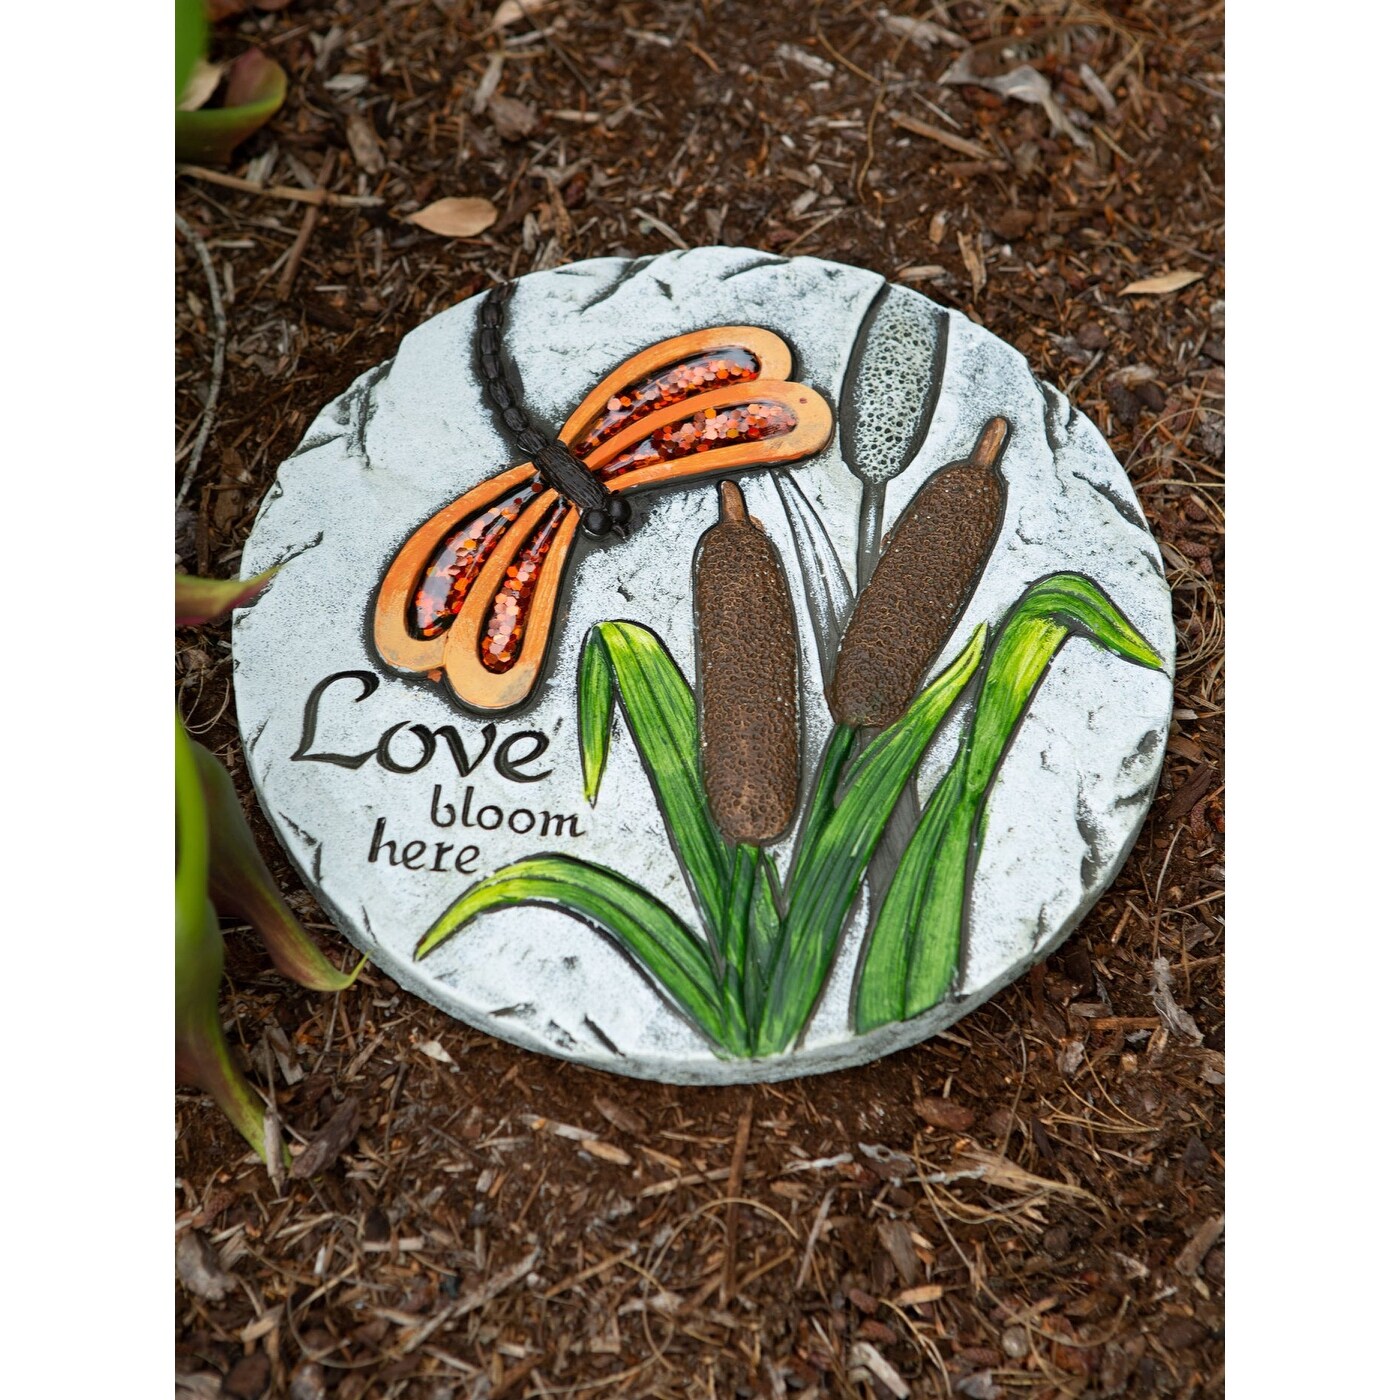 Set of 6 Love Blooms Here Dragon Fly Stepping Stones - Multi-Color